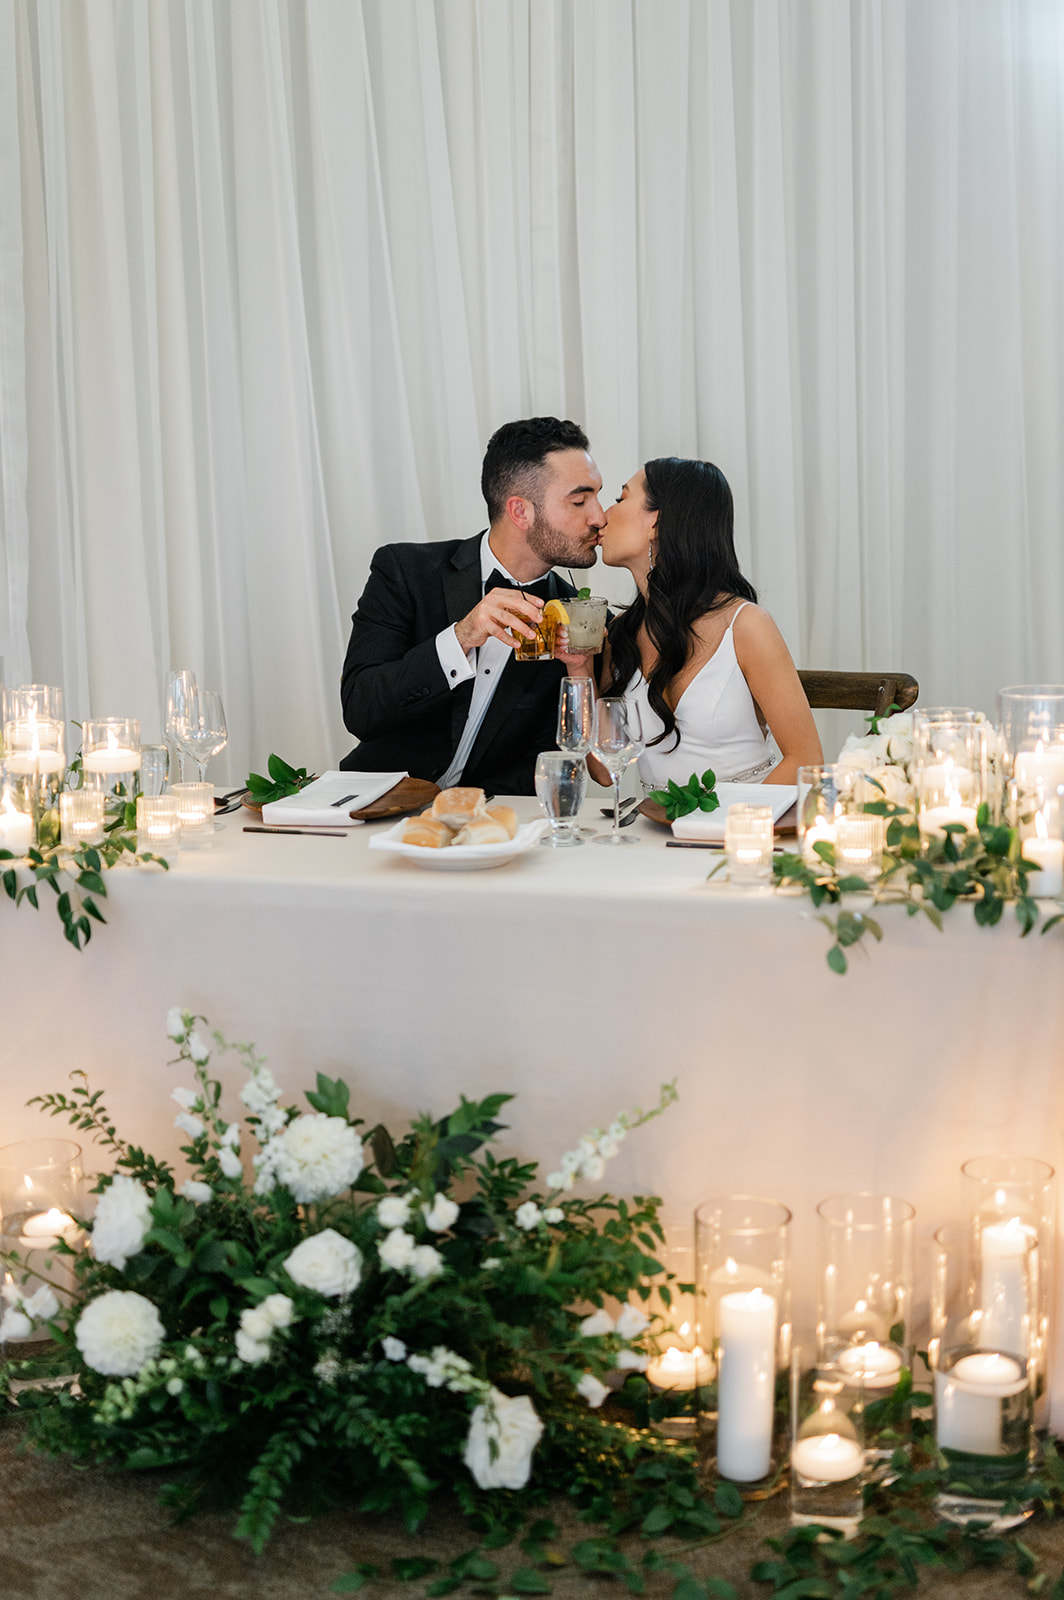 Bride and groom kissing at the sweetheart table at their wedding reception